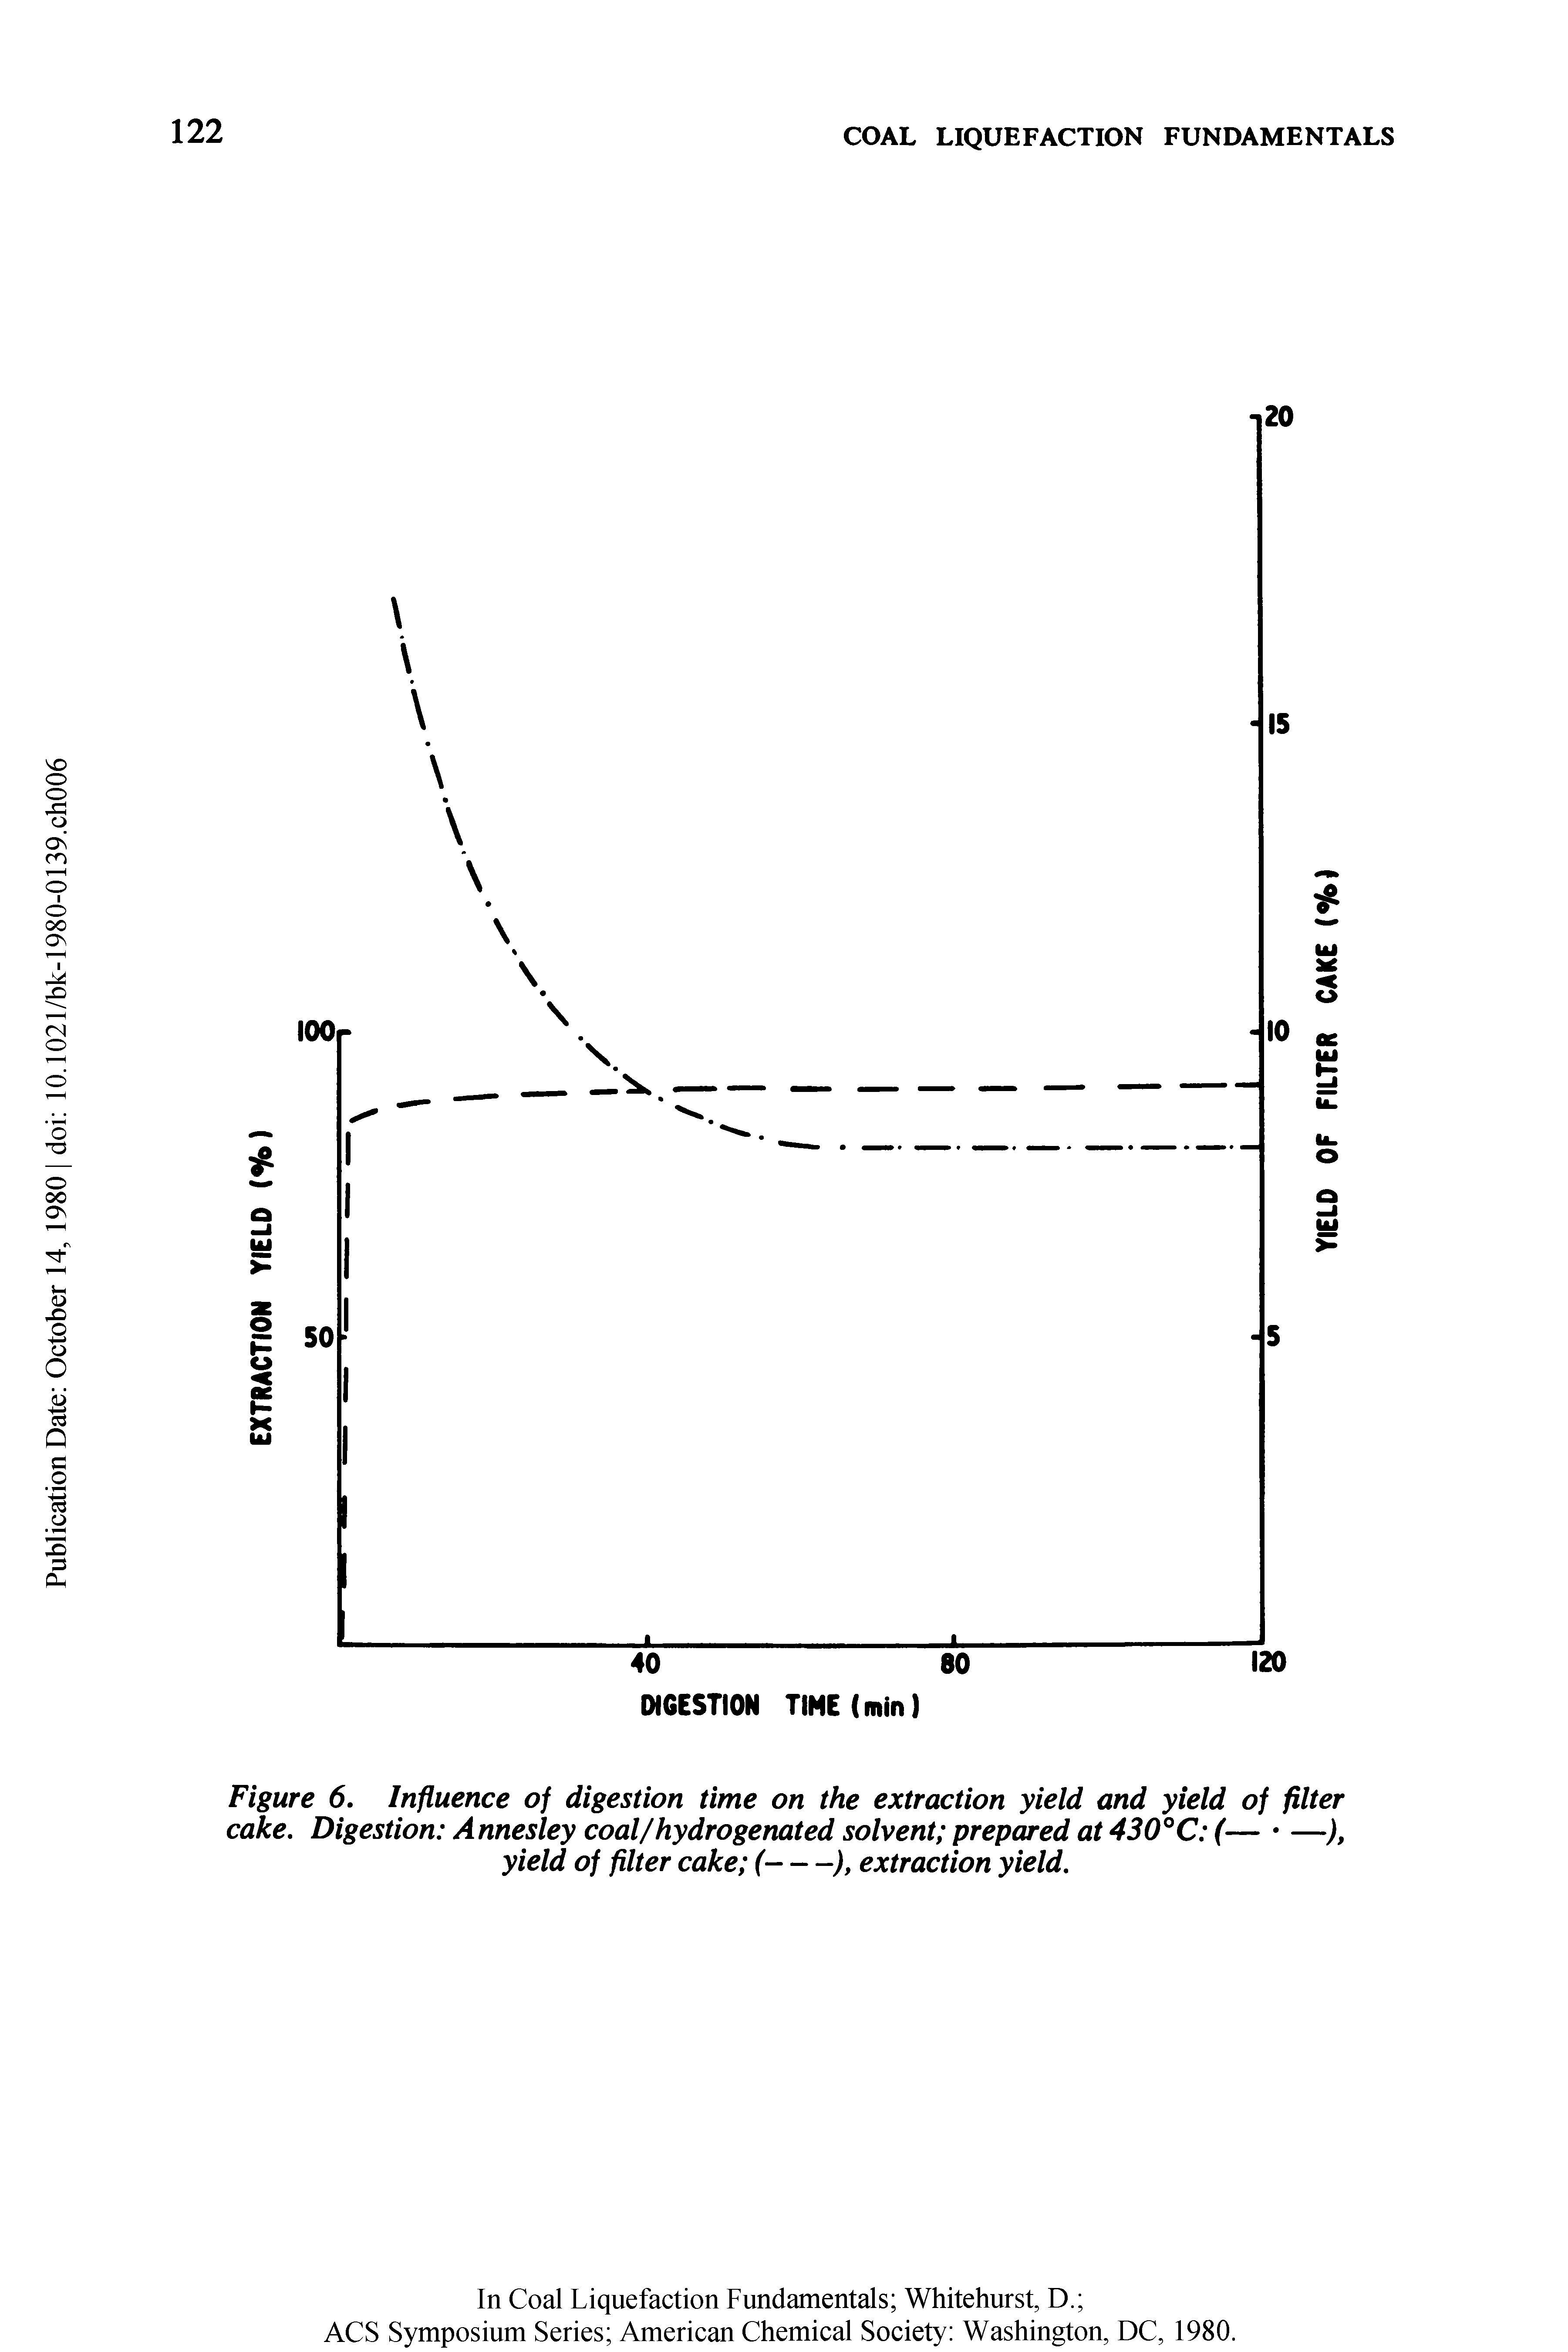 Figure 6. Influence of digestion time on the extraction yield and yield of filter cake. Digestion Annesley coal/hydrogenated solvent prepared at 430°C (— —), yield of filter cake (------------------), extraction yield.